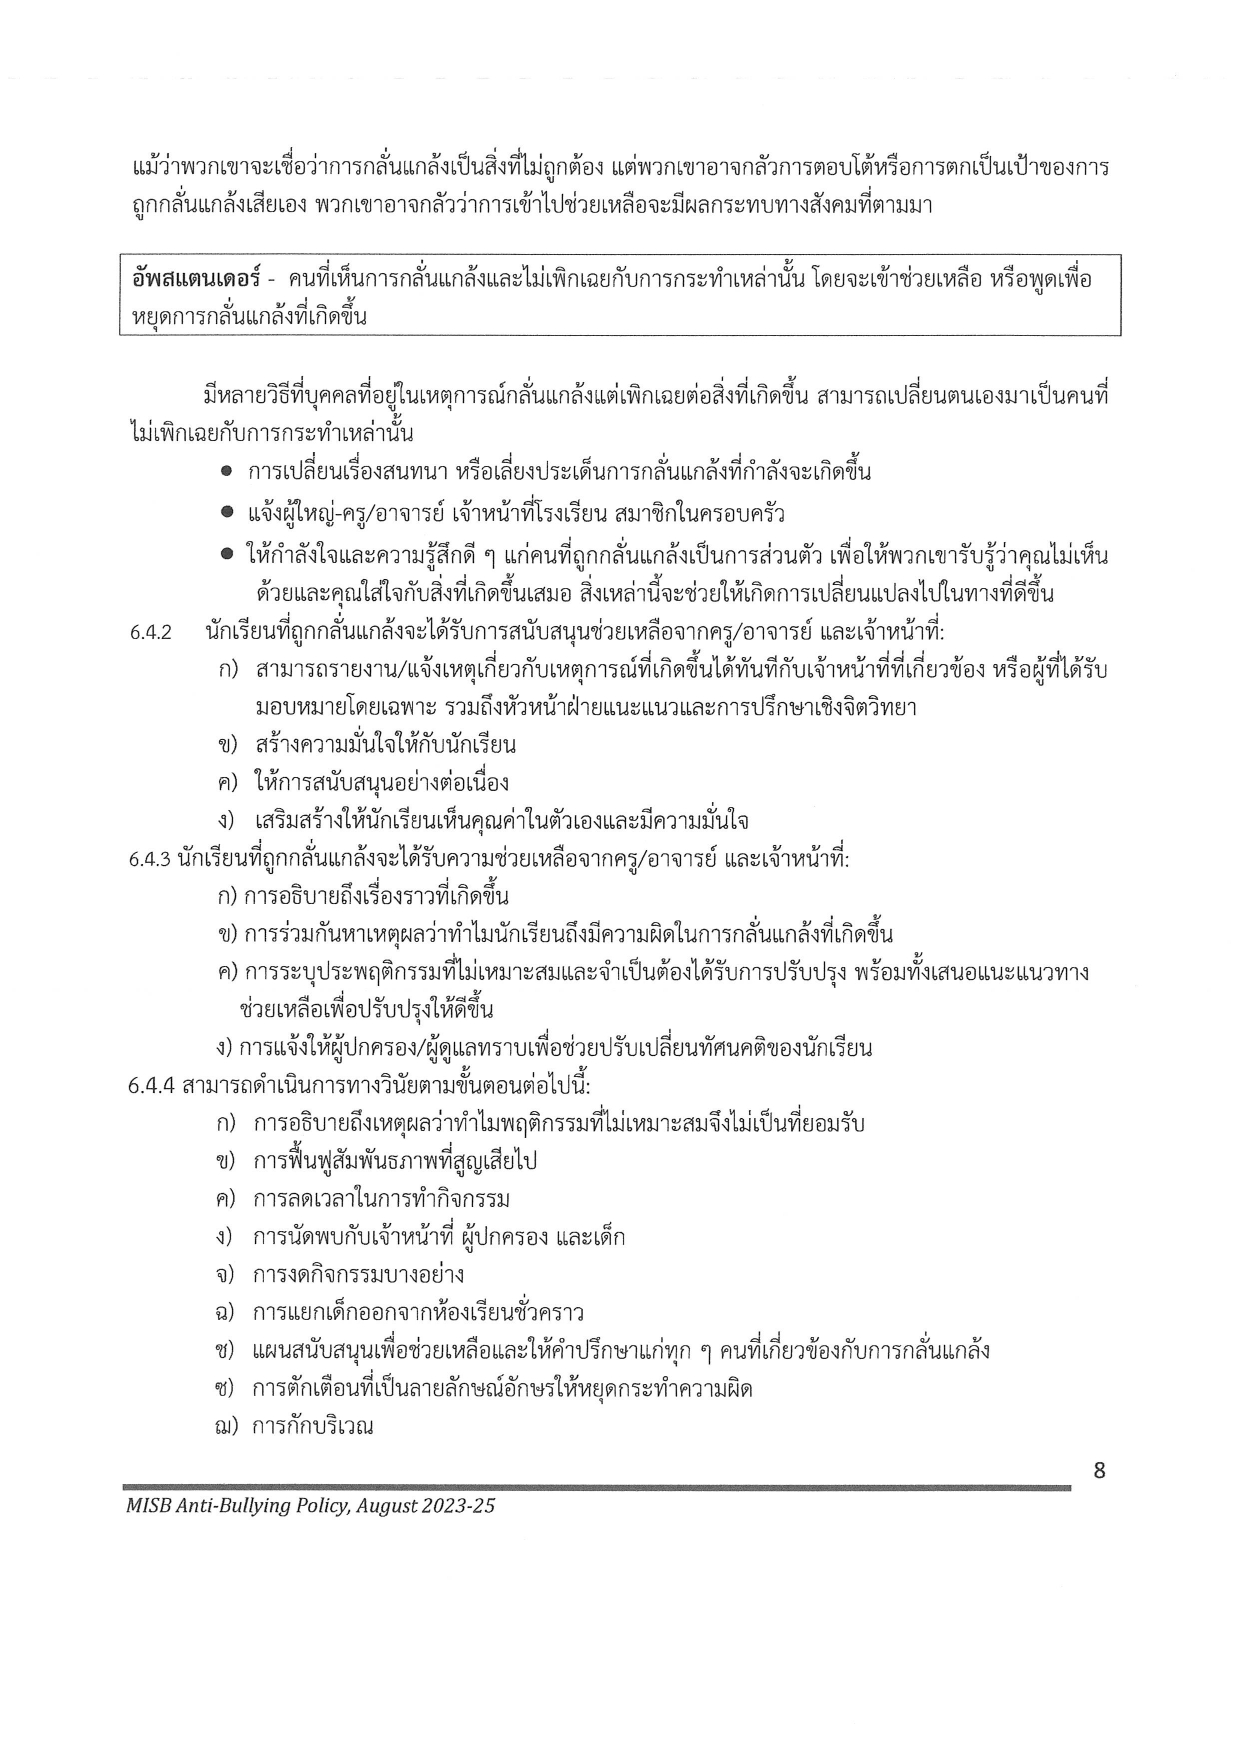 Anti Bullying Policy 2023 2025 Thai page 0010